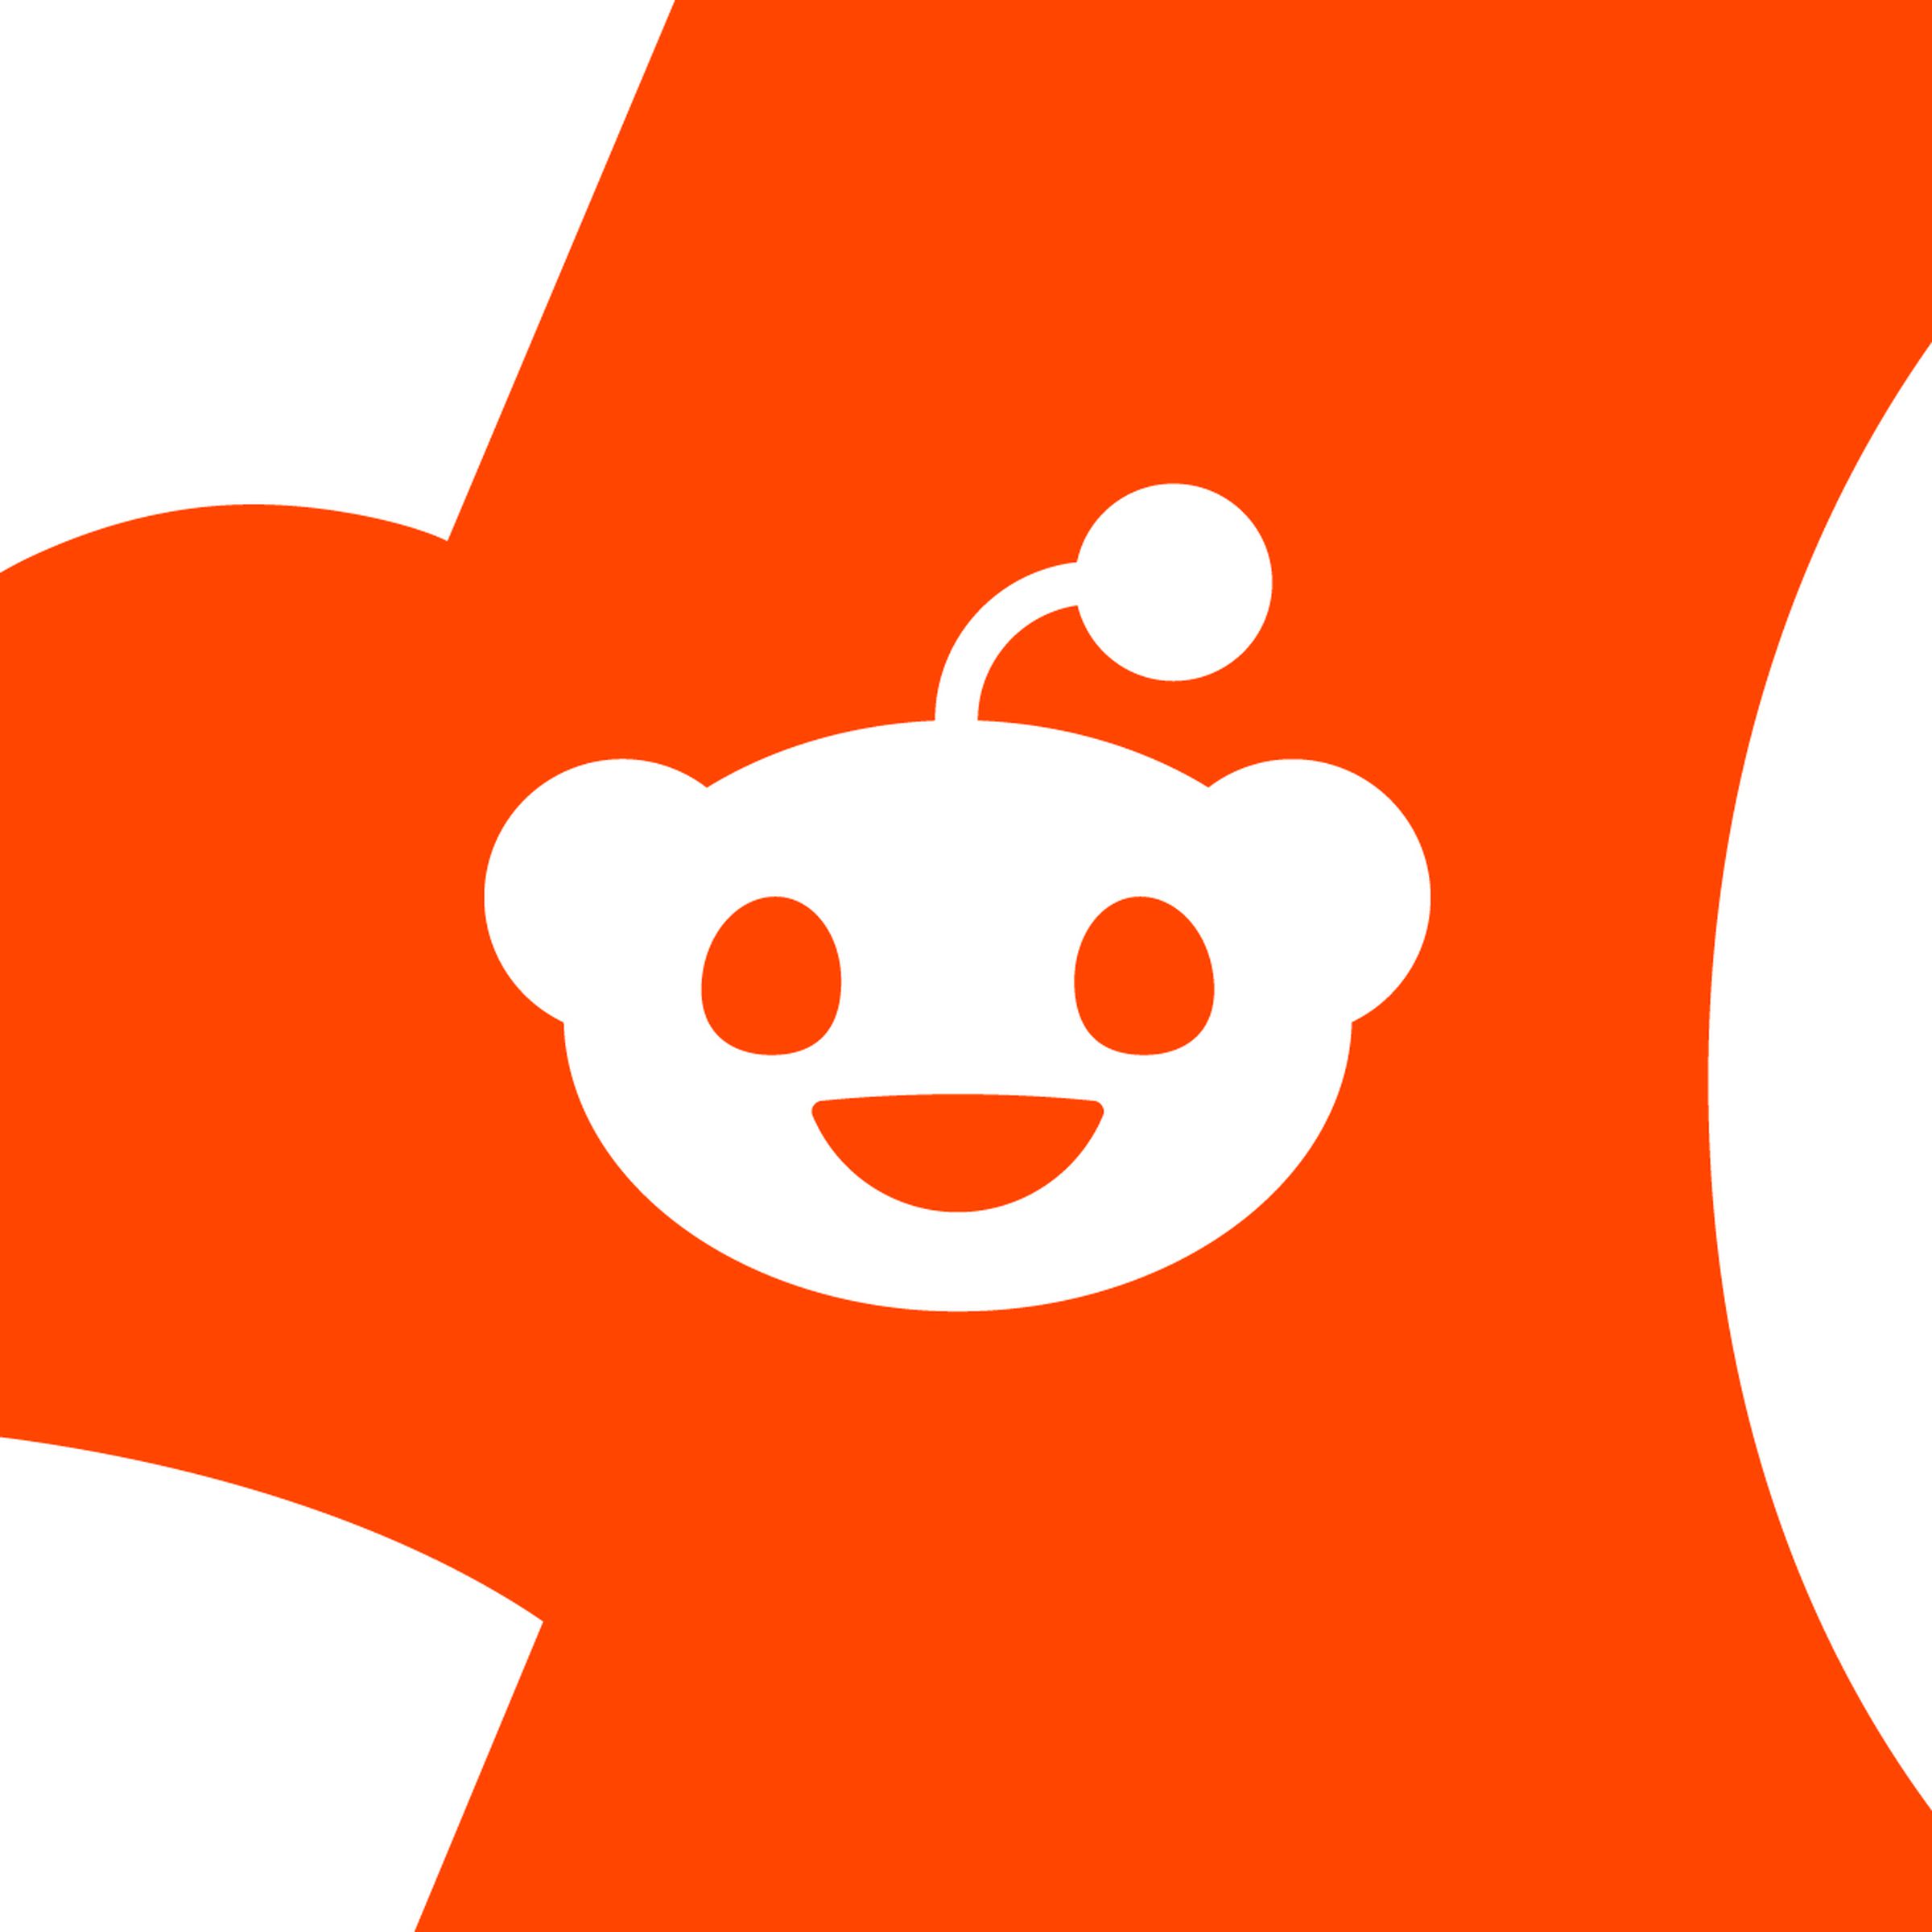 An image showing the Reddit logo on a red and white background